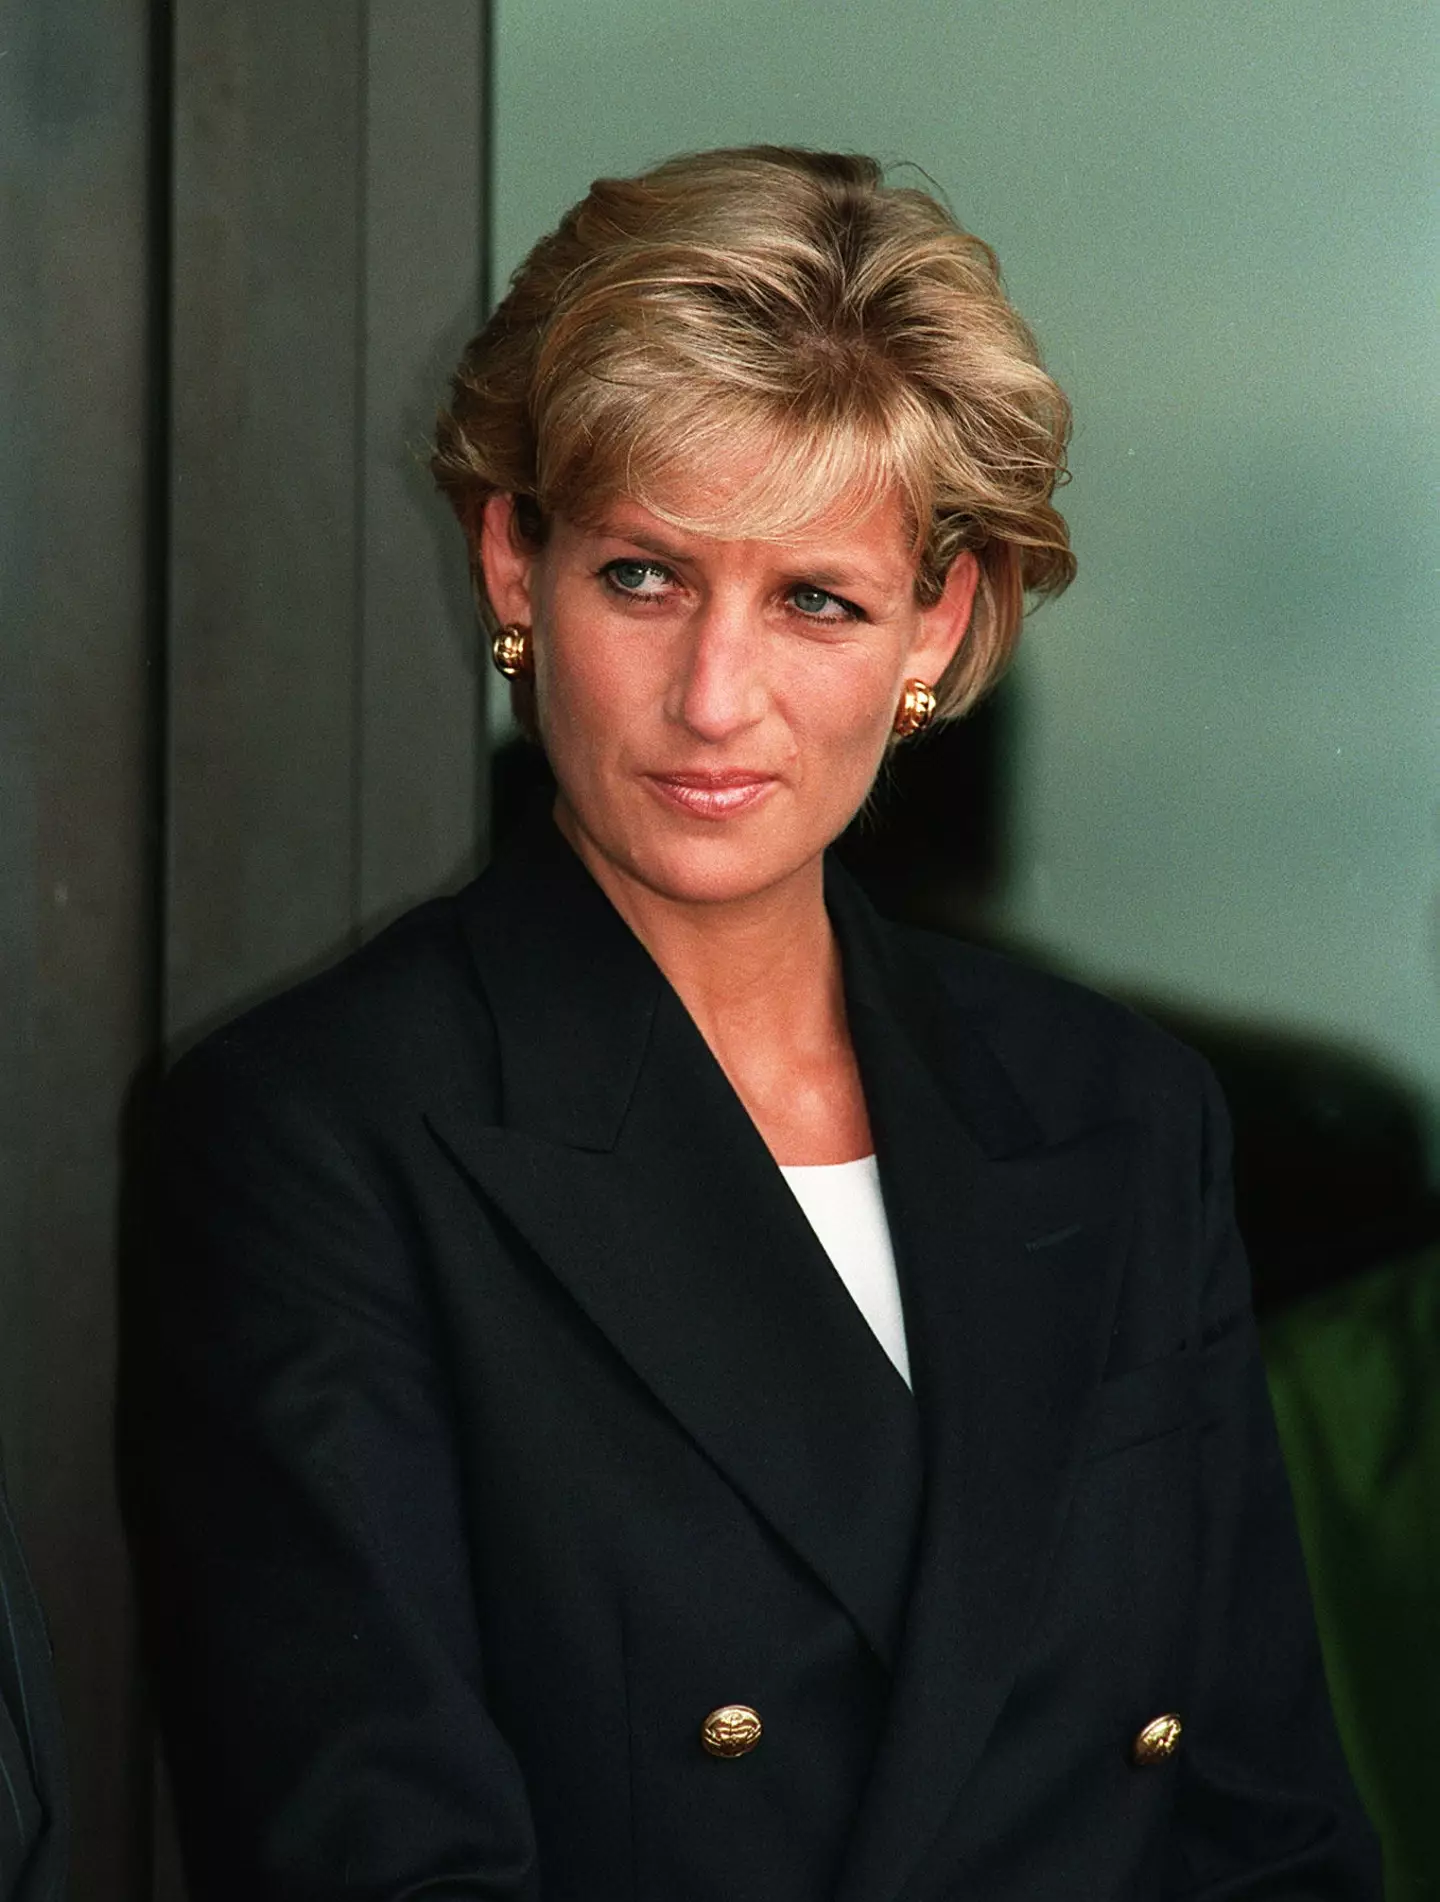 Diana thought she would be the victim of ‘some accident in her car, such as a pre-prepared brake failure’.